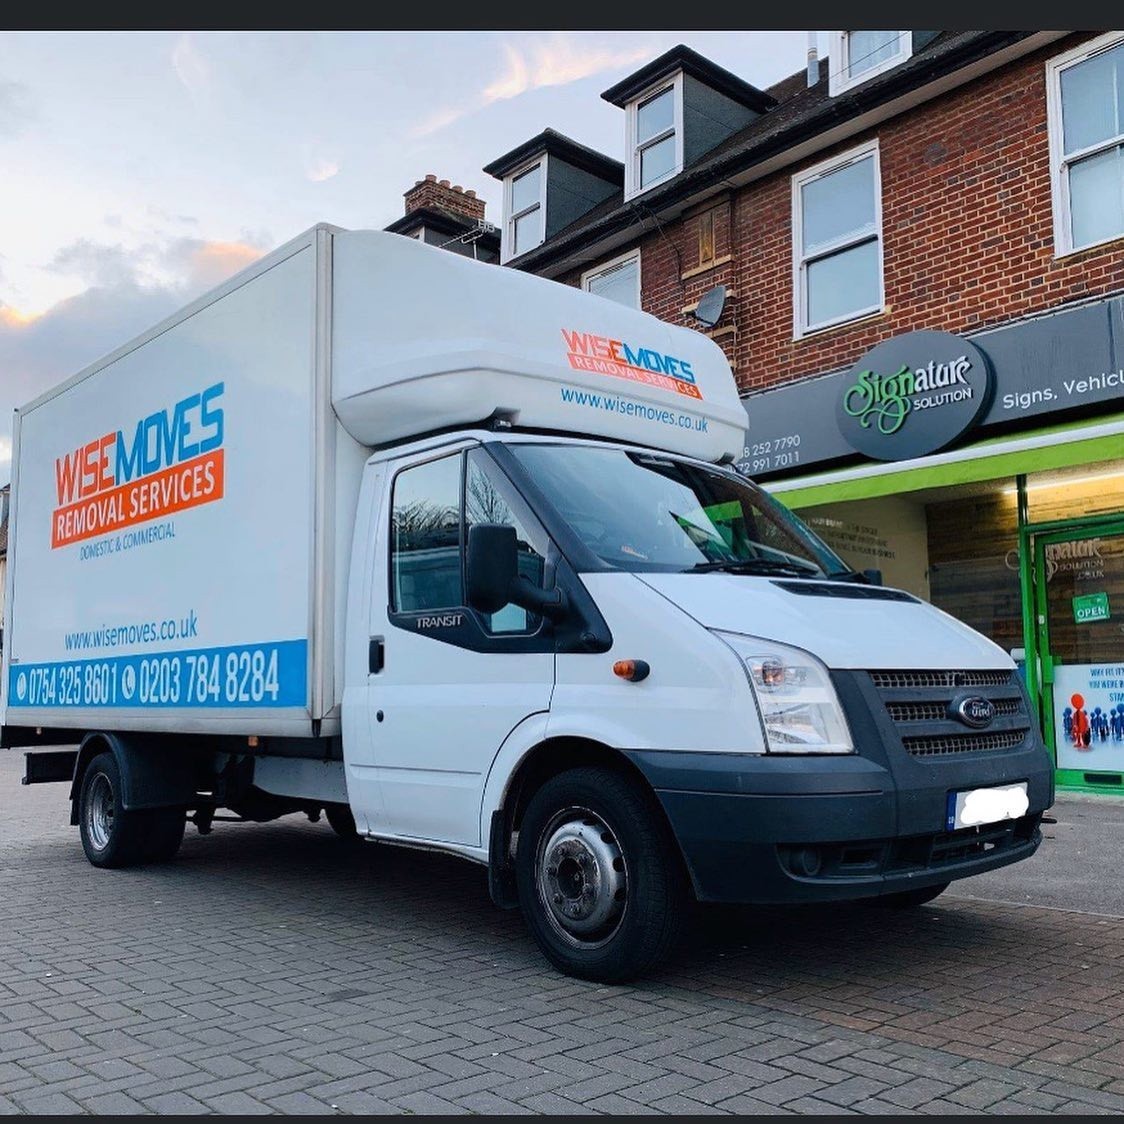 House Removals Services Hackney - Wise Moves